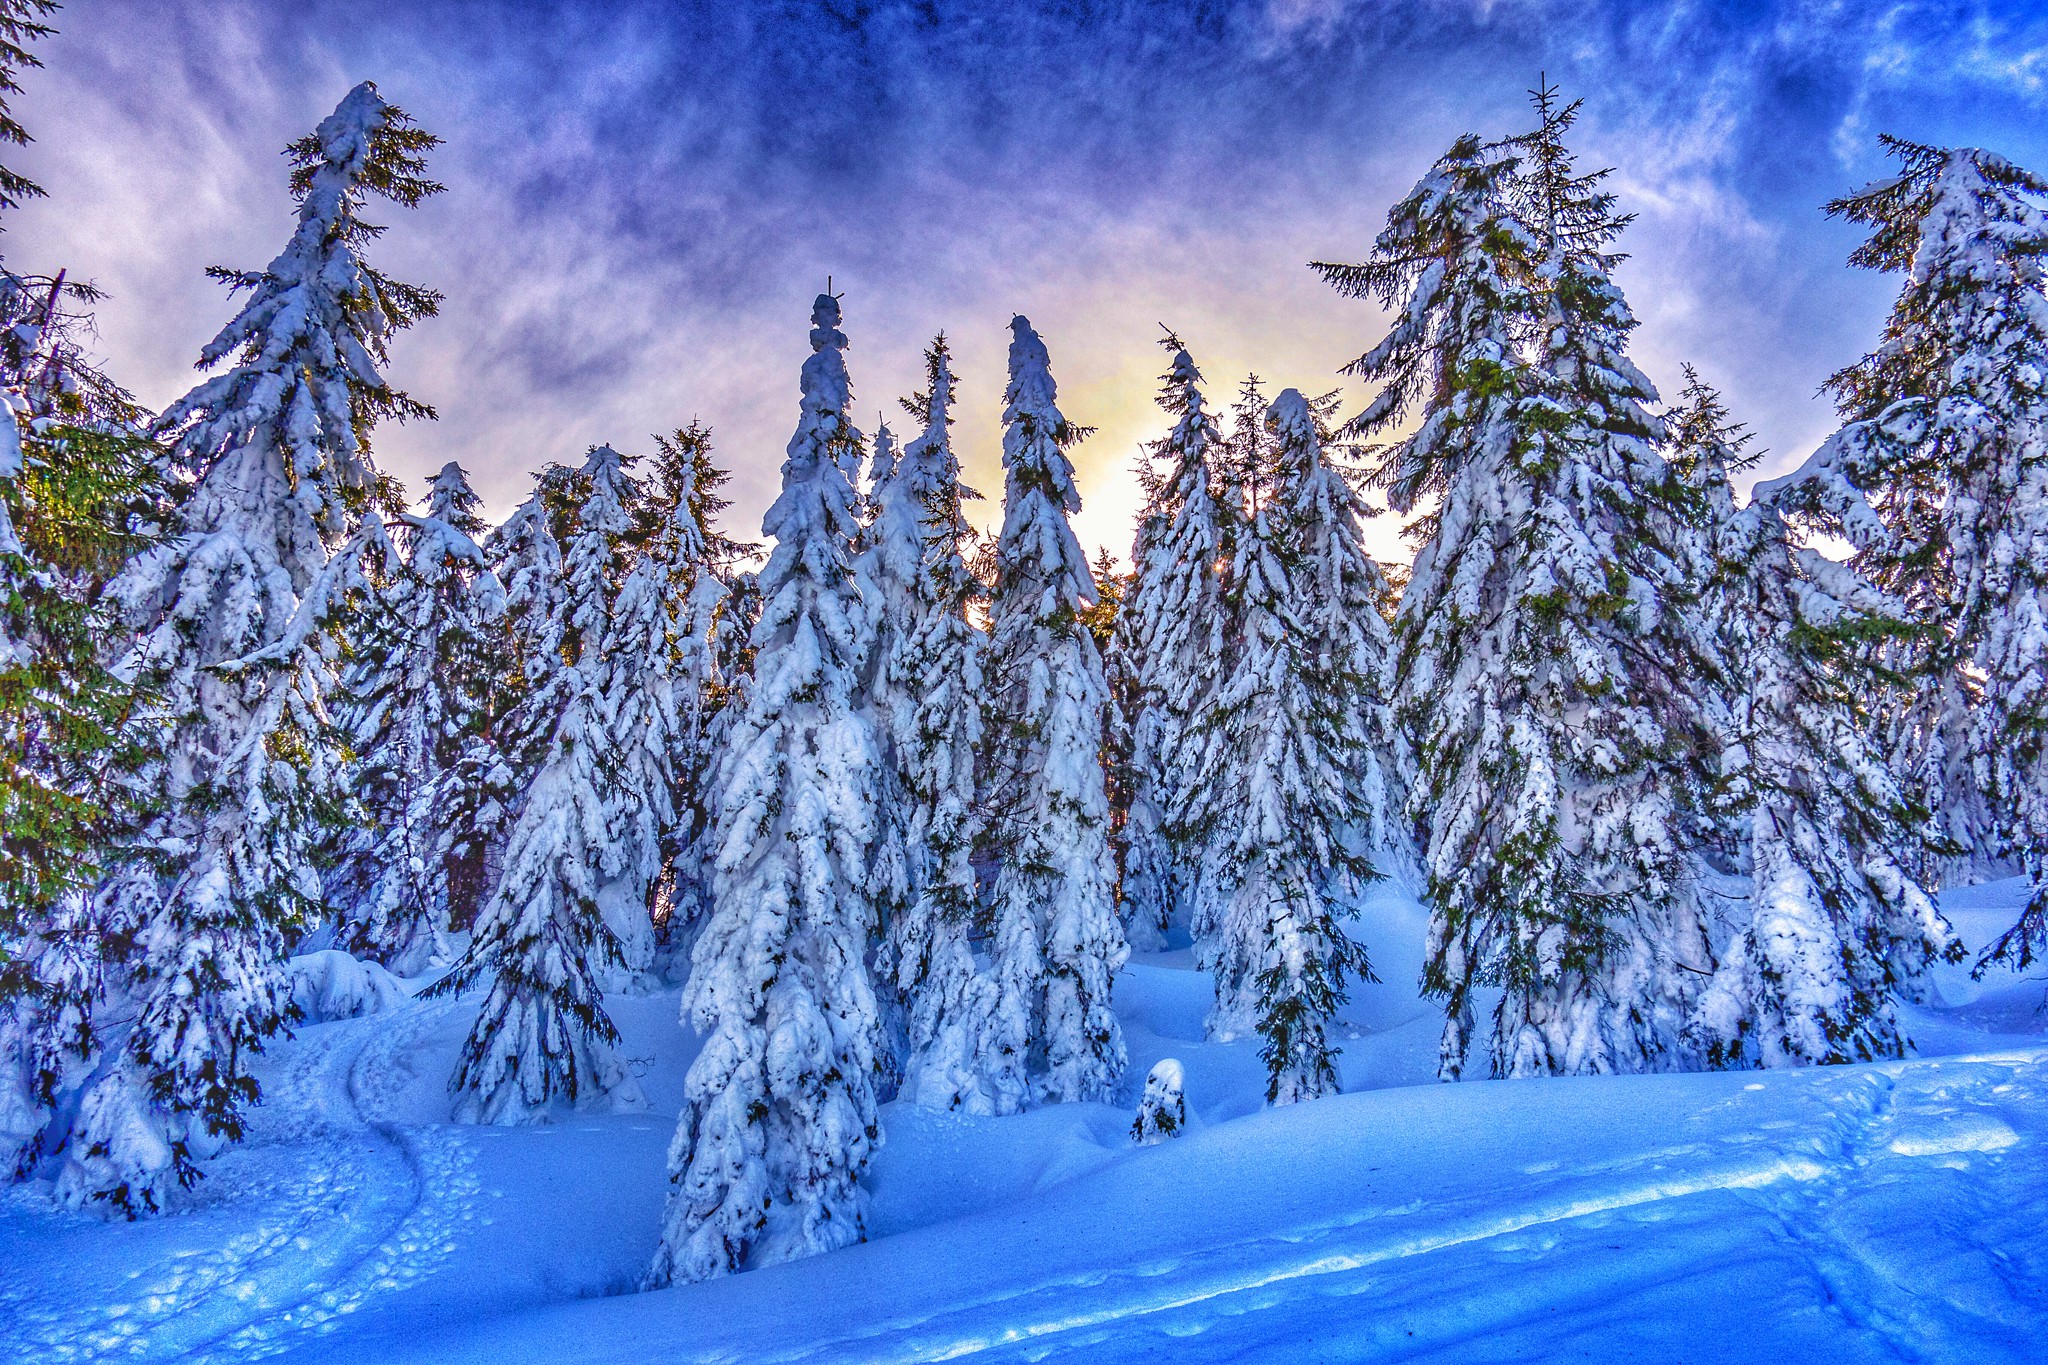 Christmas trees in winter in Austria